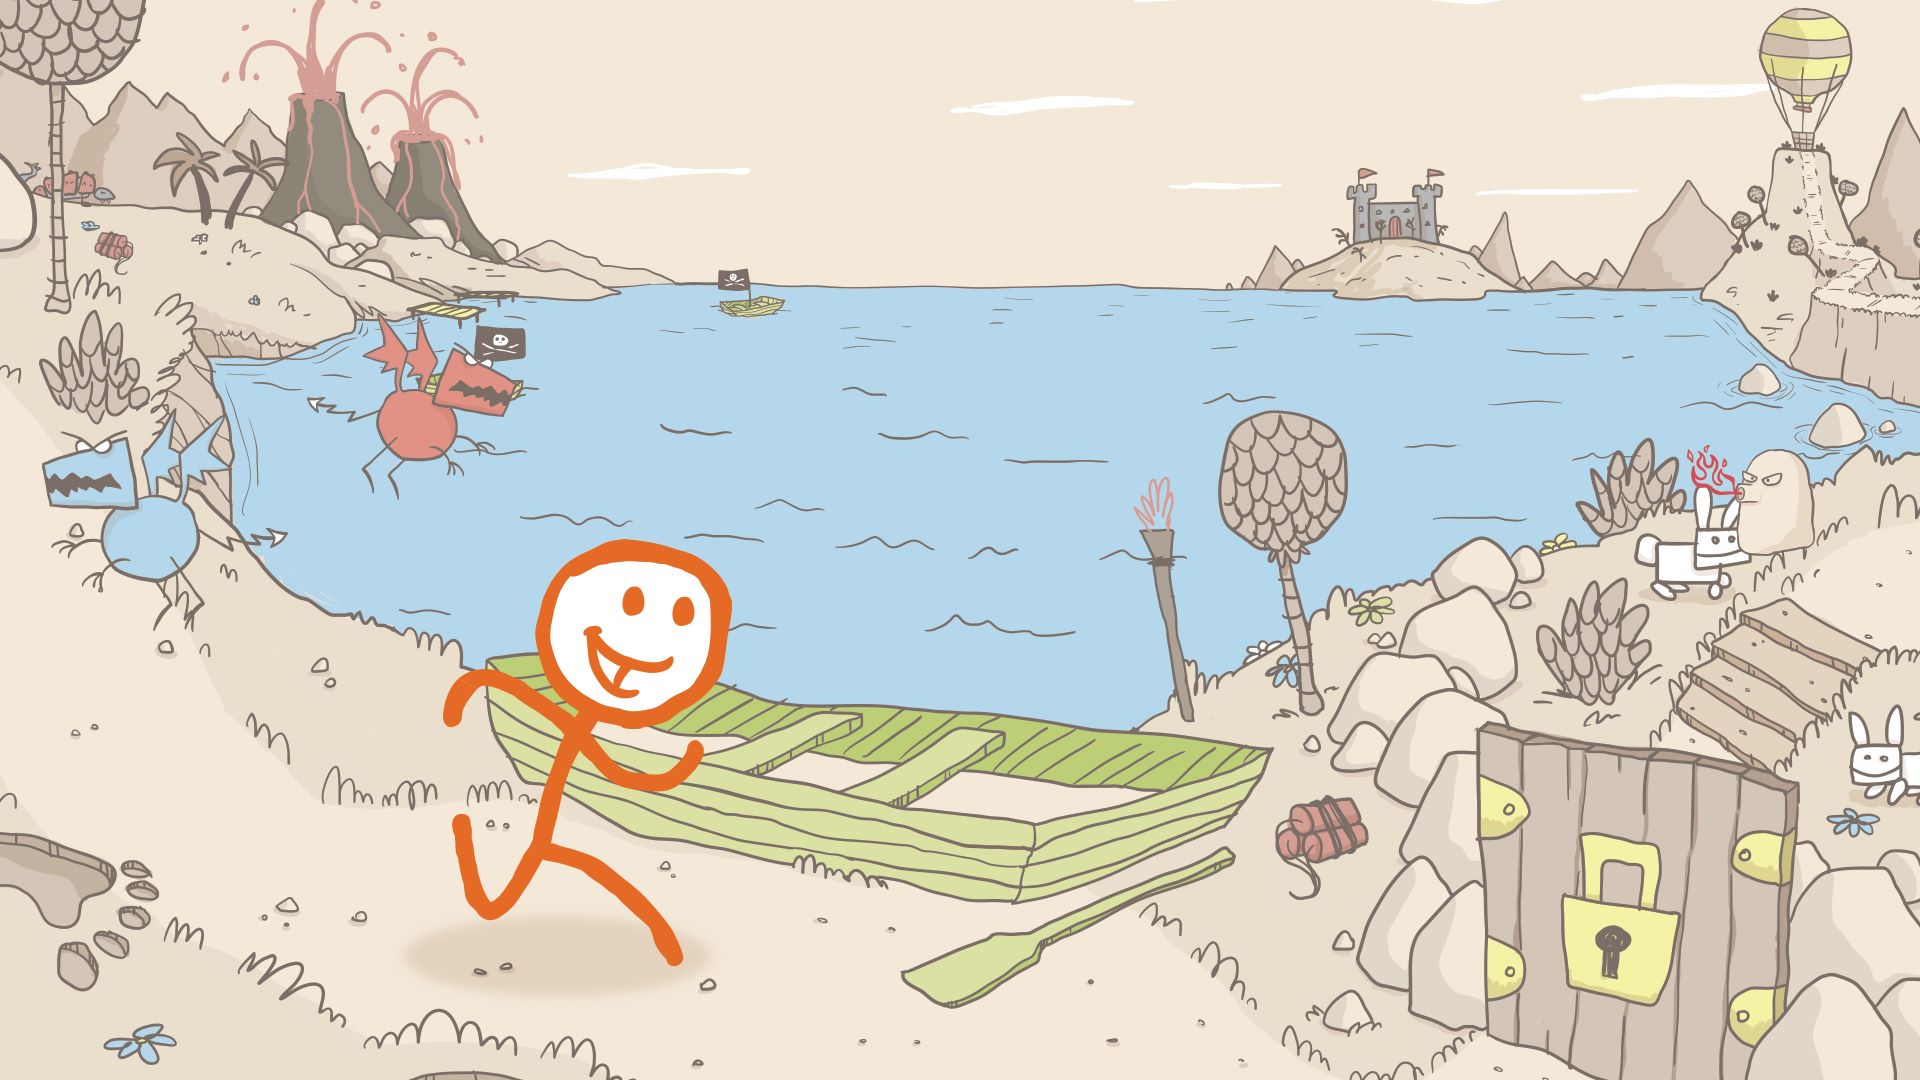 Draw a Stickman: EPIC Free for android download